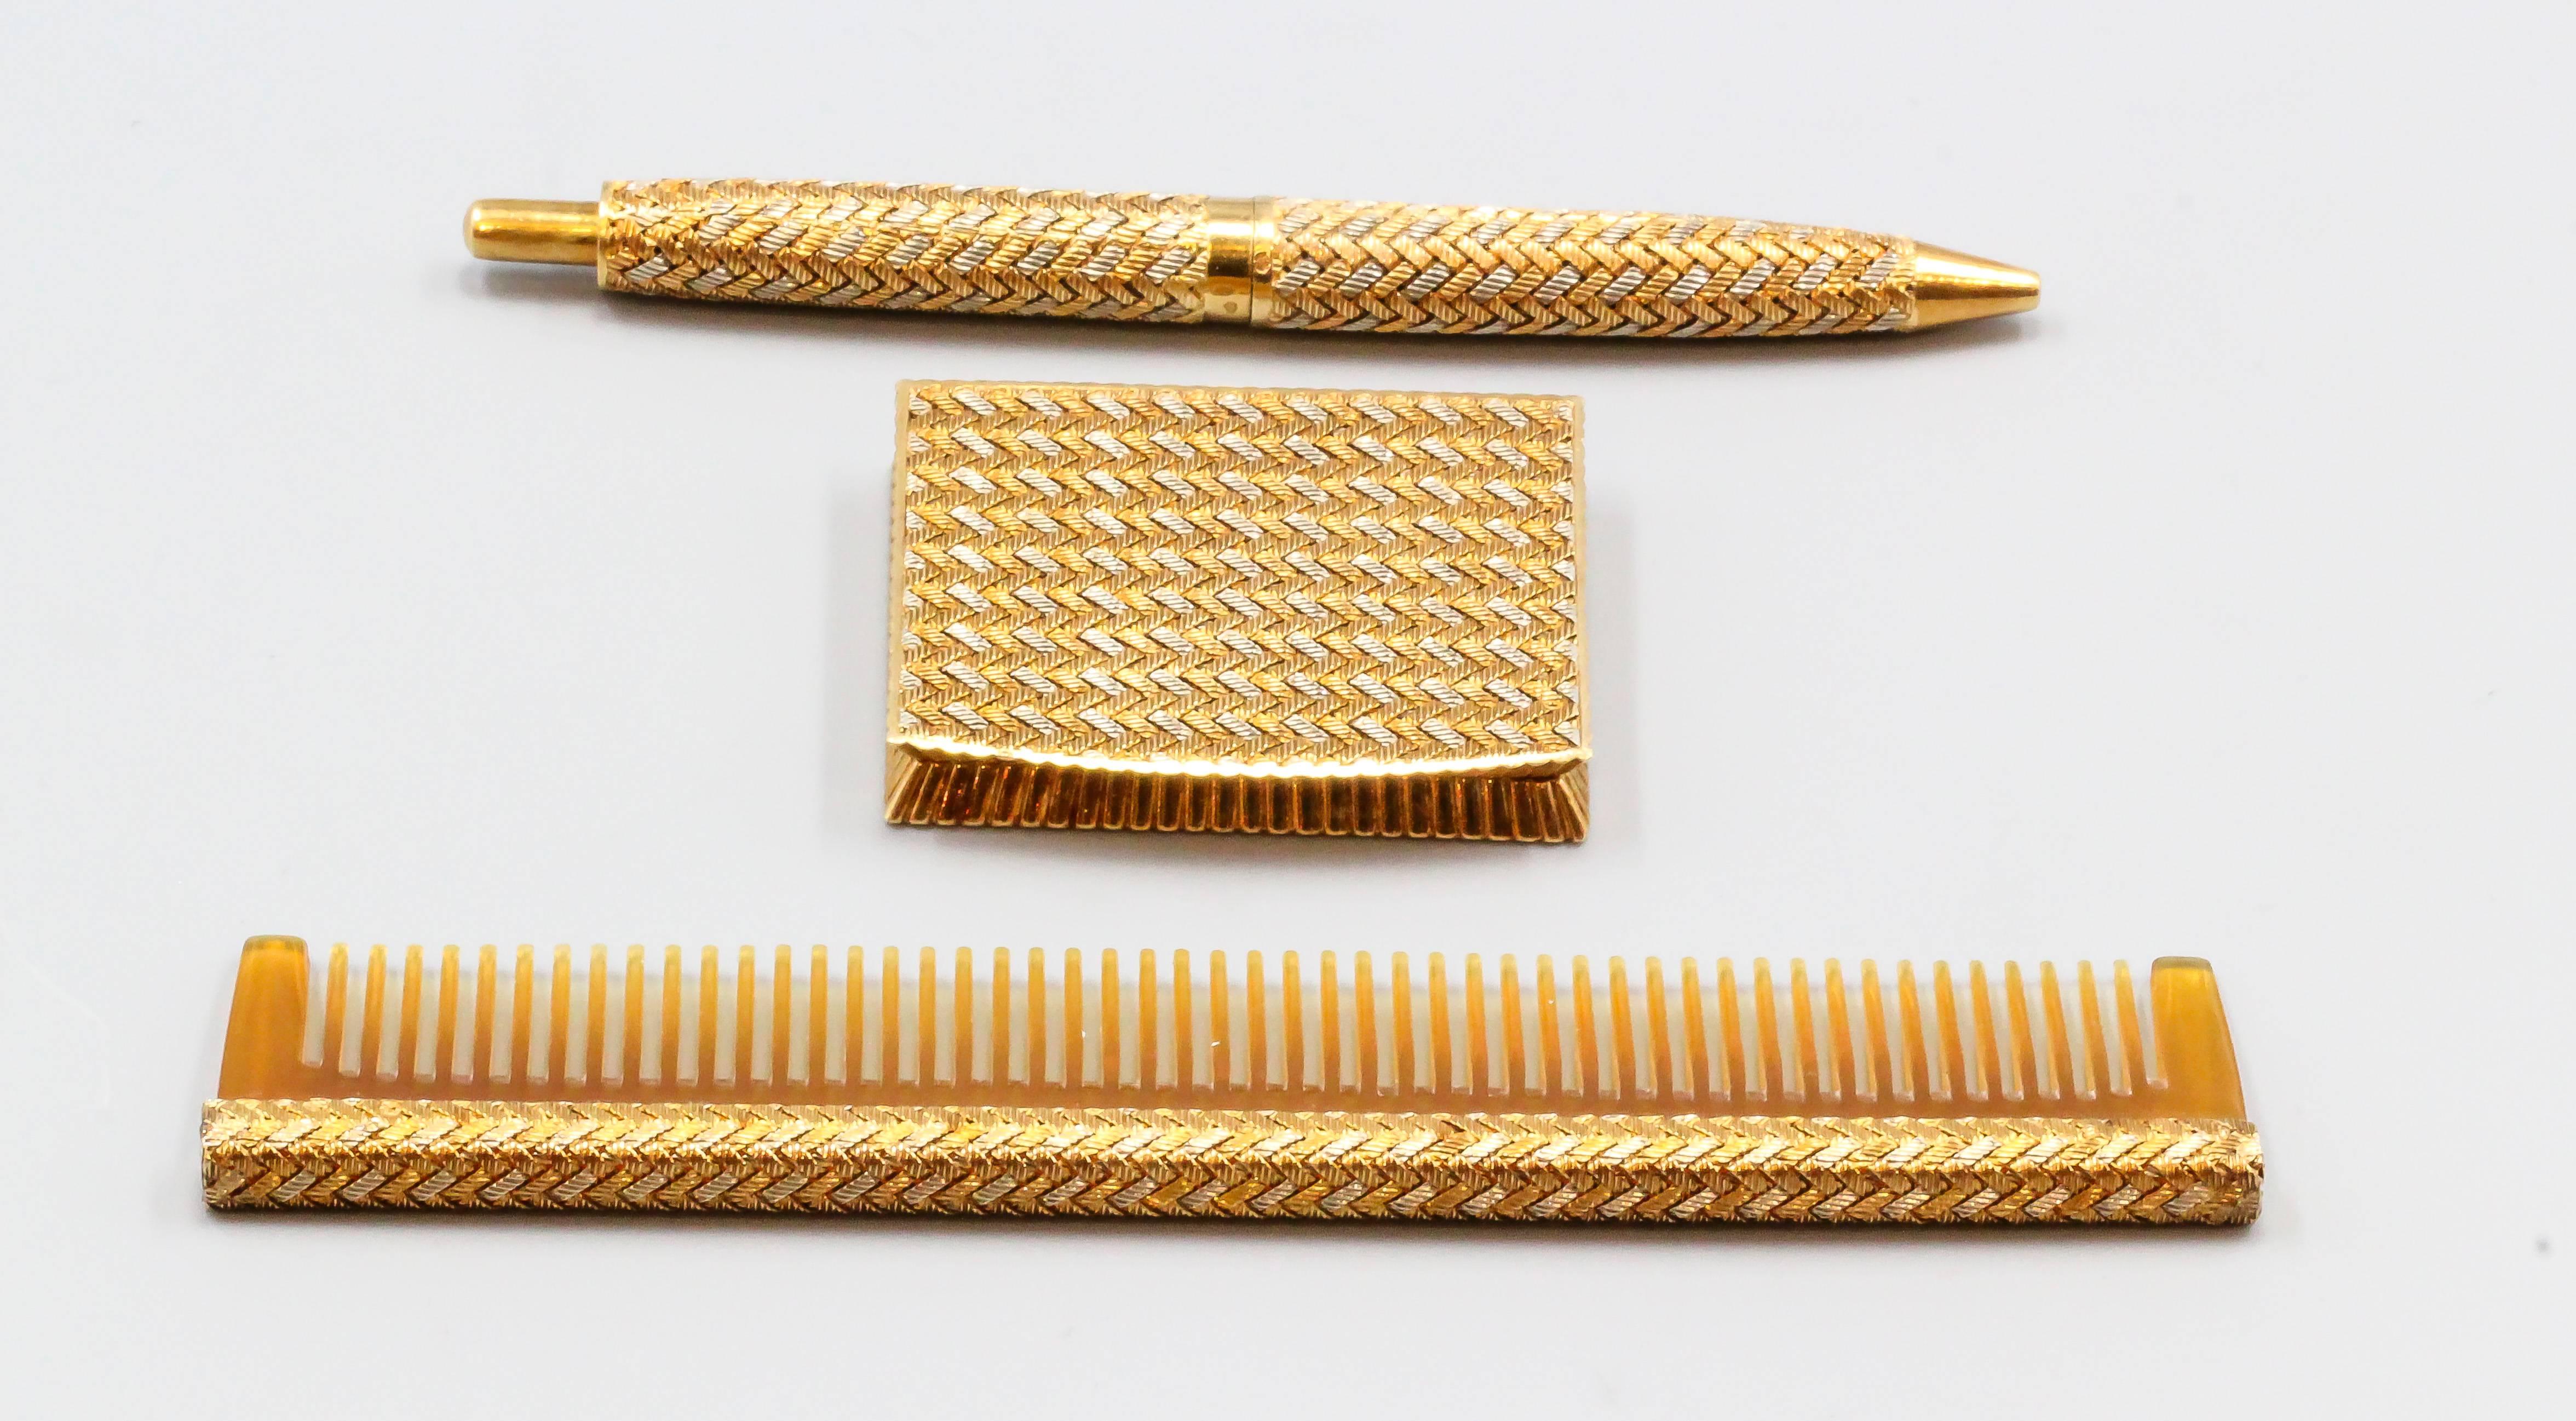 Stylish 18K white, yellow and rose gold basket weave vanity set of French origin, circa 1940s-50s. It features beautiful and intricate workmanship and includes a pill box, ballpoint pen and comb. Highly ornate and collectible and would make a great